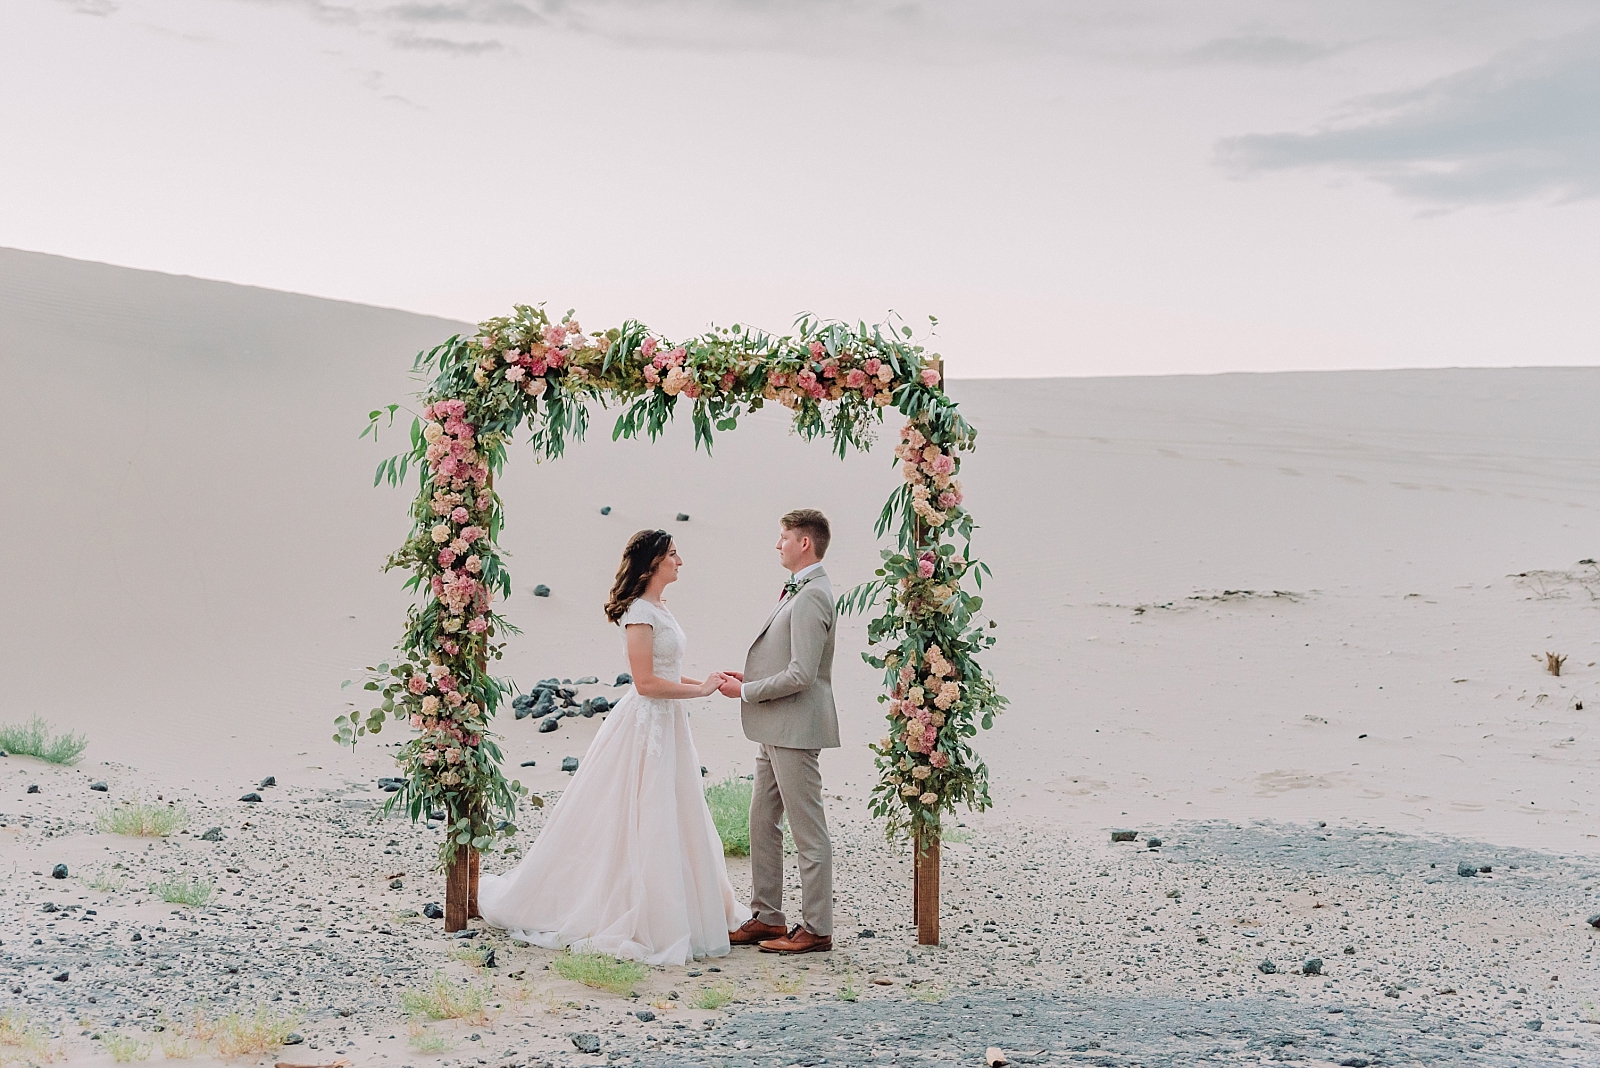 floral wedding arch in the desert with bride and groom holding hands while standing under the arch